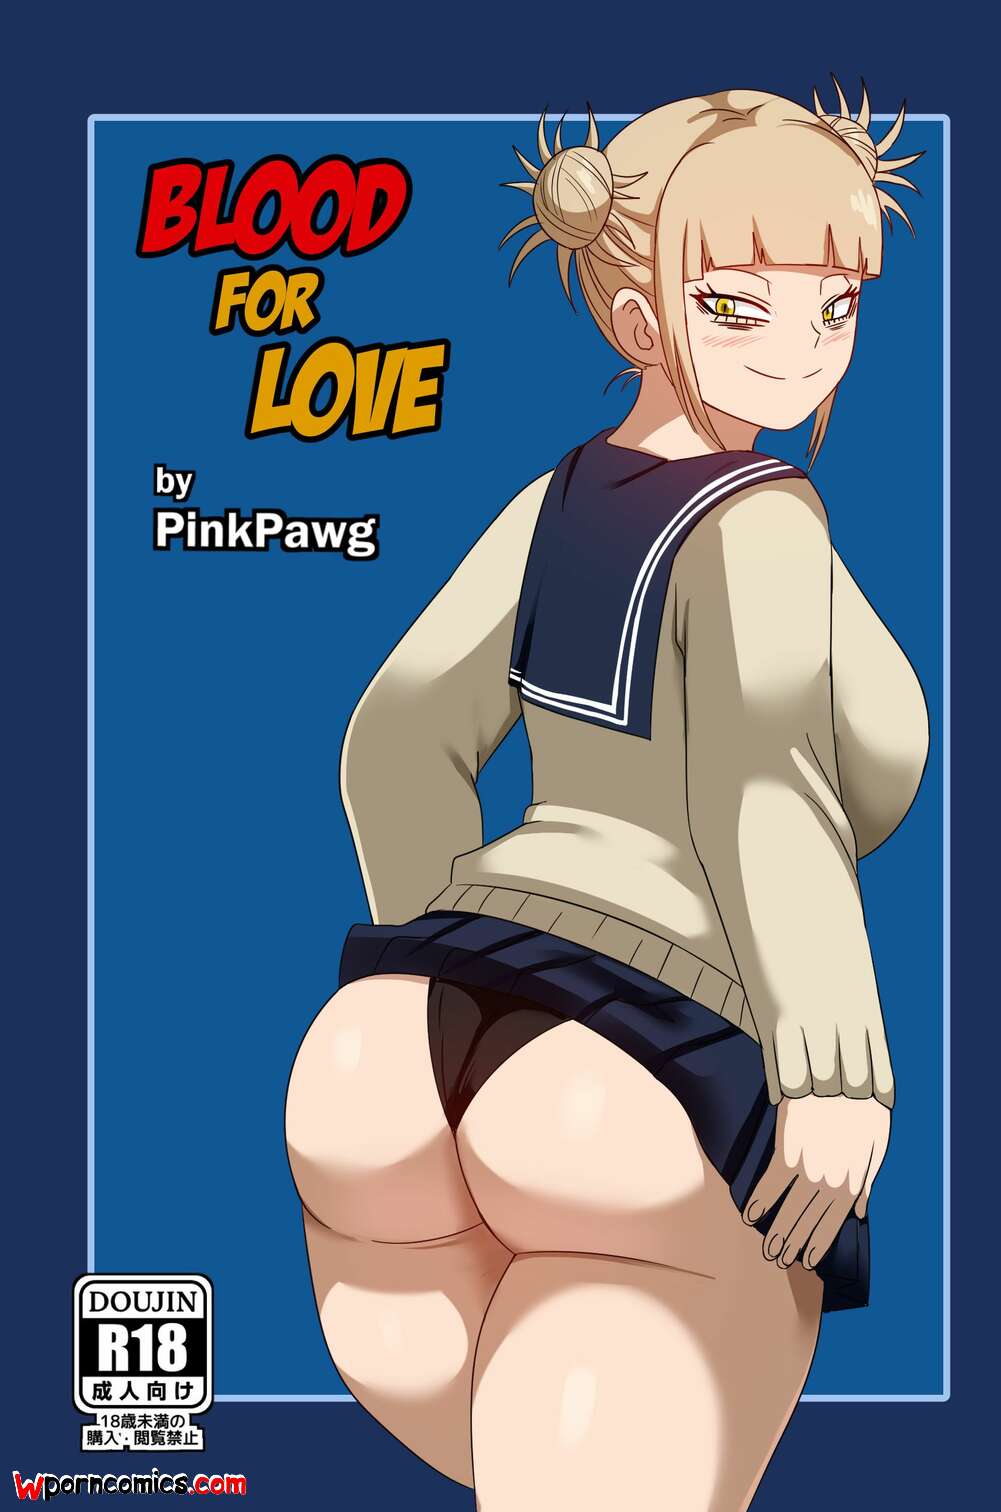 ðŸ˜ˆ Porn comic Blood for Love. Chapter 1. My Hero Academia. Pink Pawg.  Erotic comic in a closed ðŸ˜ˆ | Porn comics hentai adult only |  hqporncomics.com